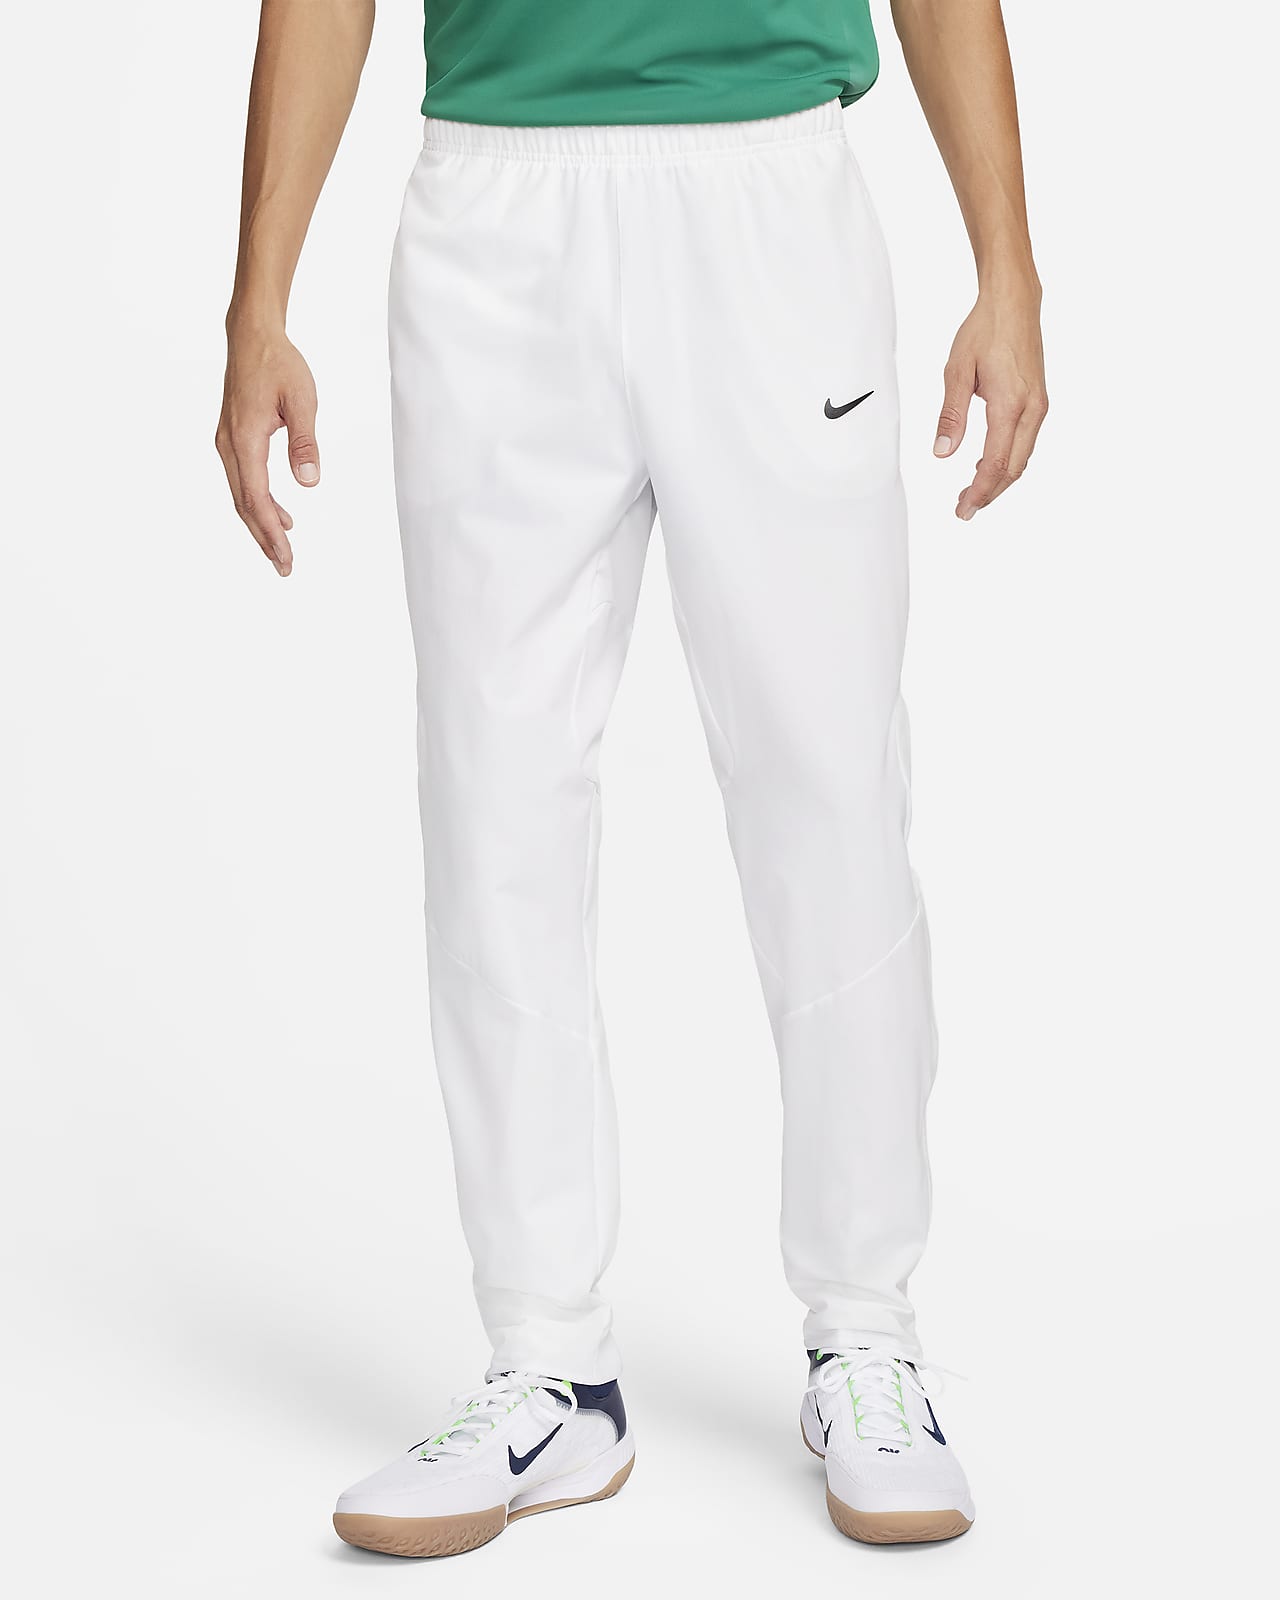 Top-Quality Nike Training Warm-Up Pants | S&R Sport